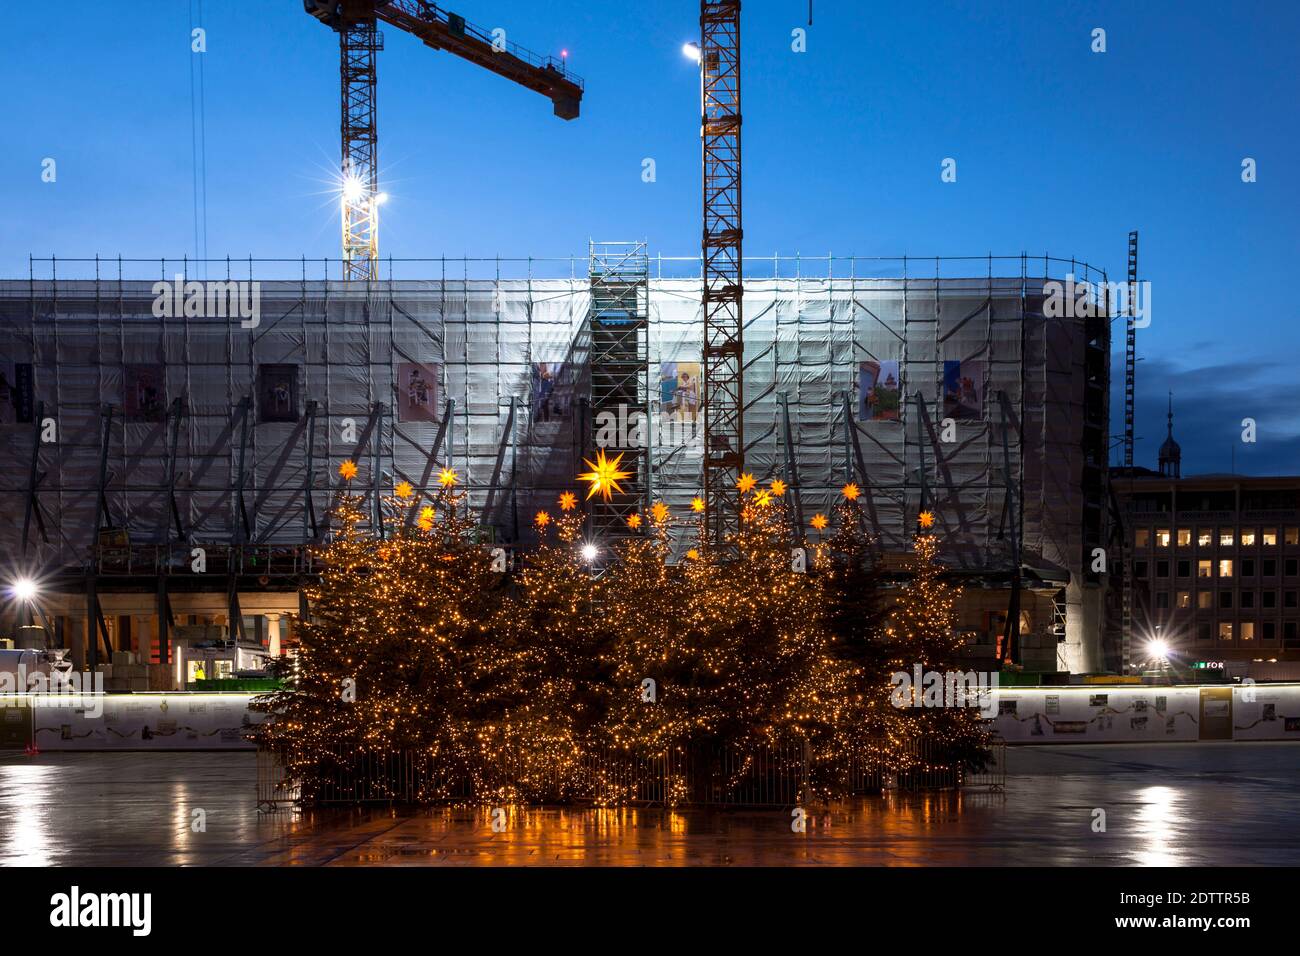 decorated Christmas trees on Roncalliplatz in front of the Dom Hotel under renovation during the Corona Pandemic, Cologne, Germany. There is usually a Stock Photo